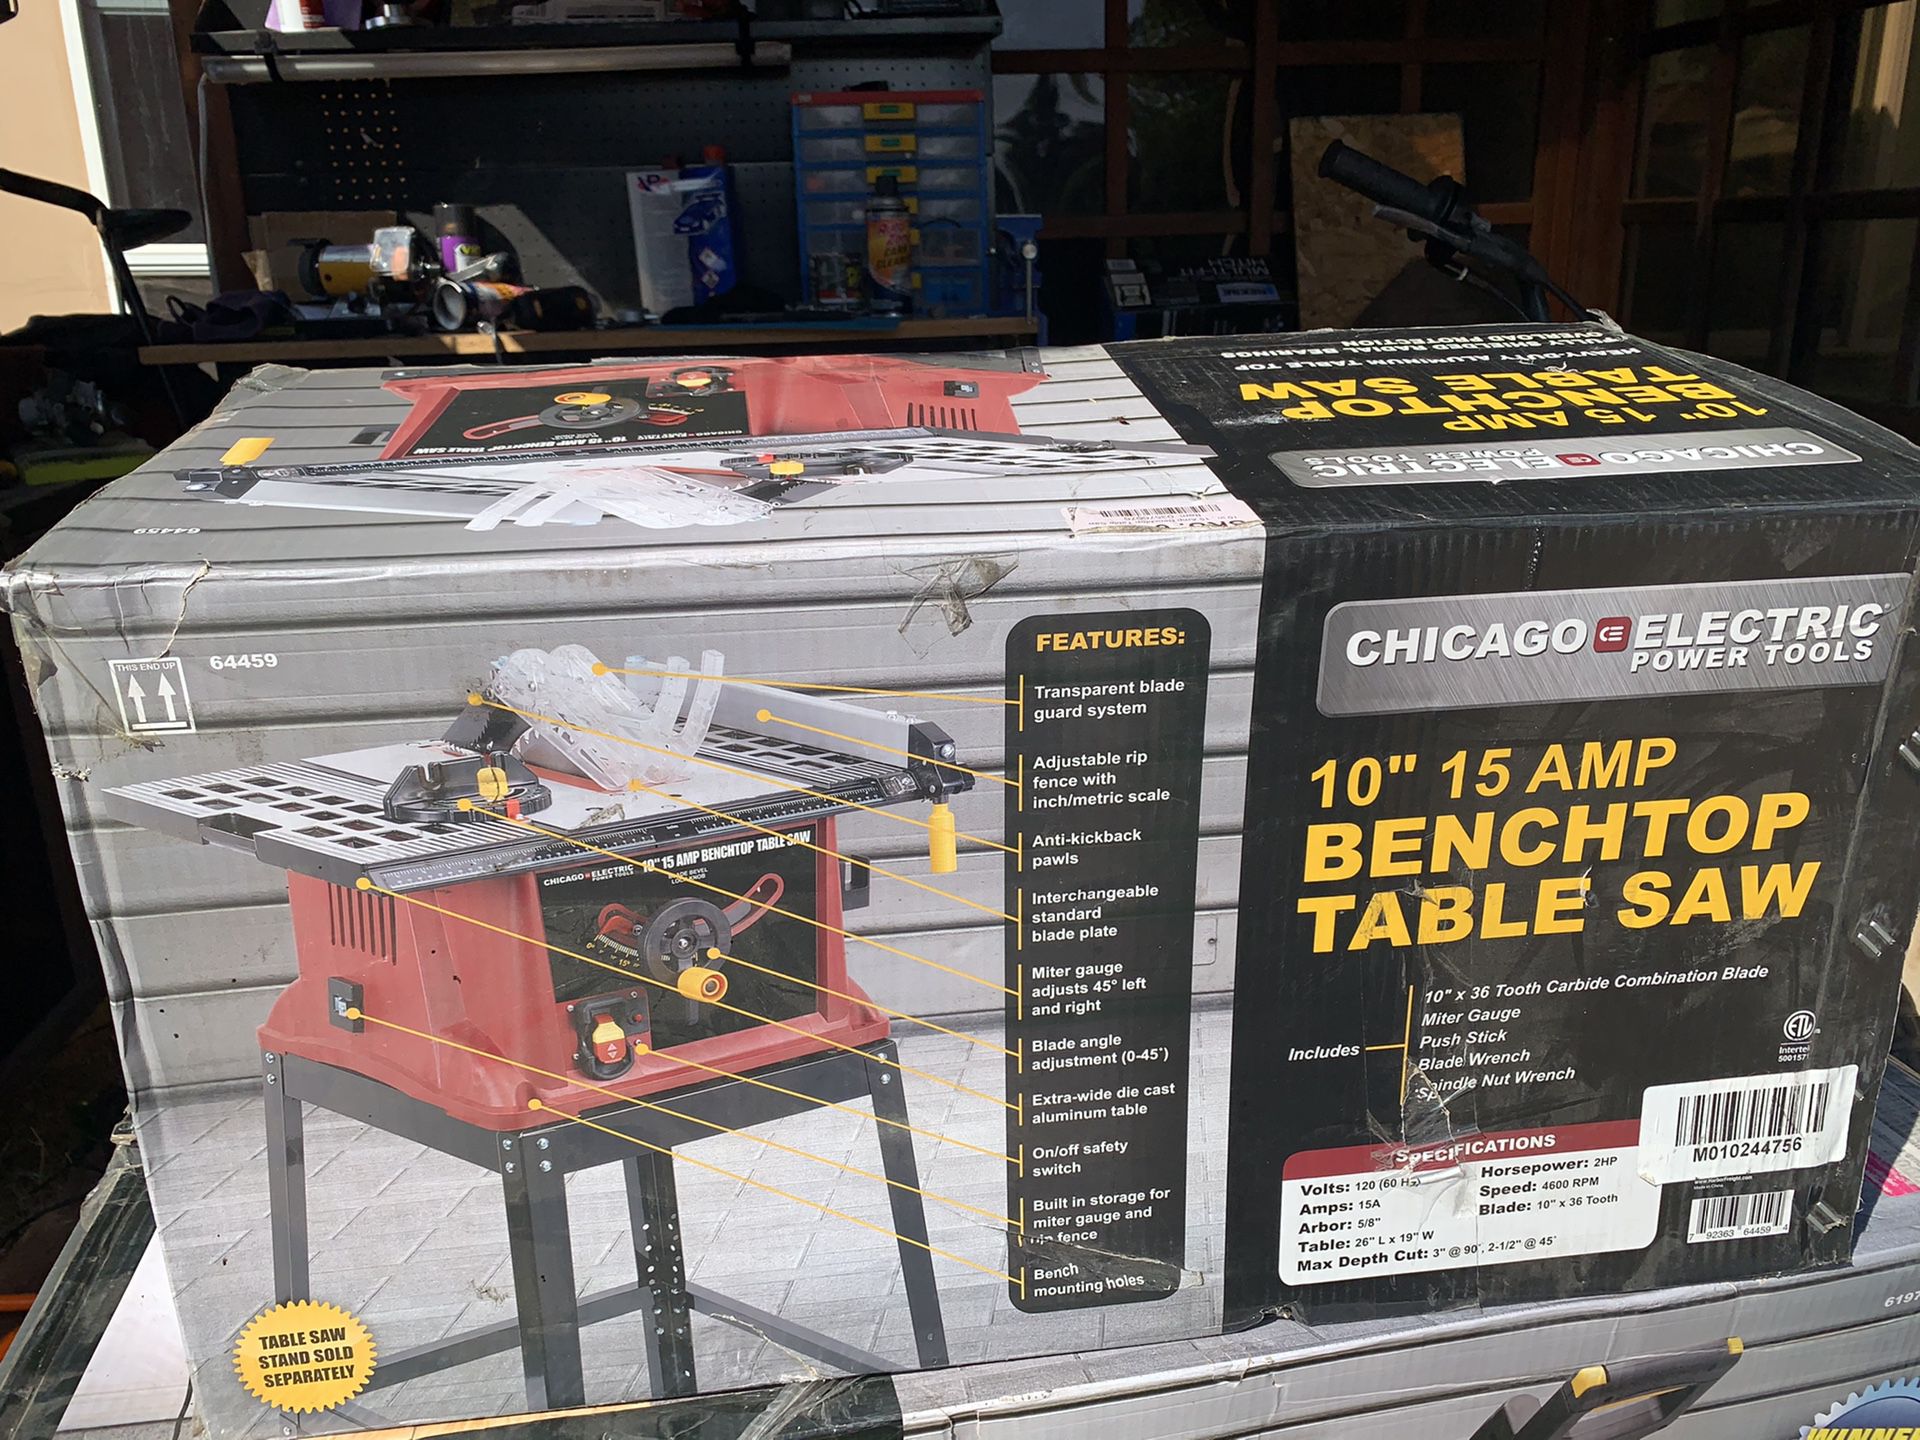 10” 15 amp bench top table saw